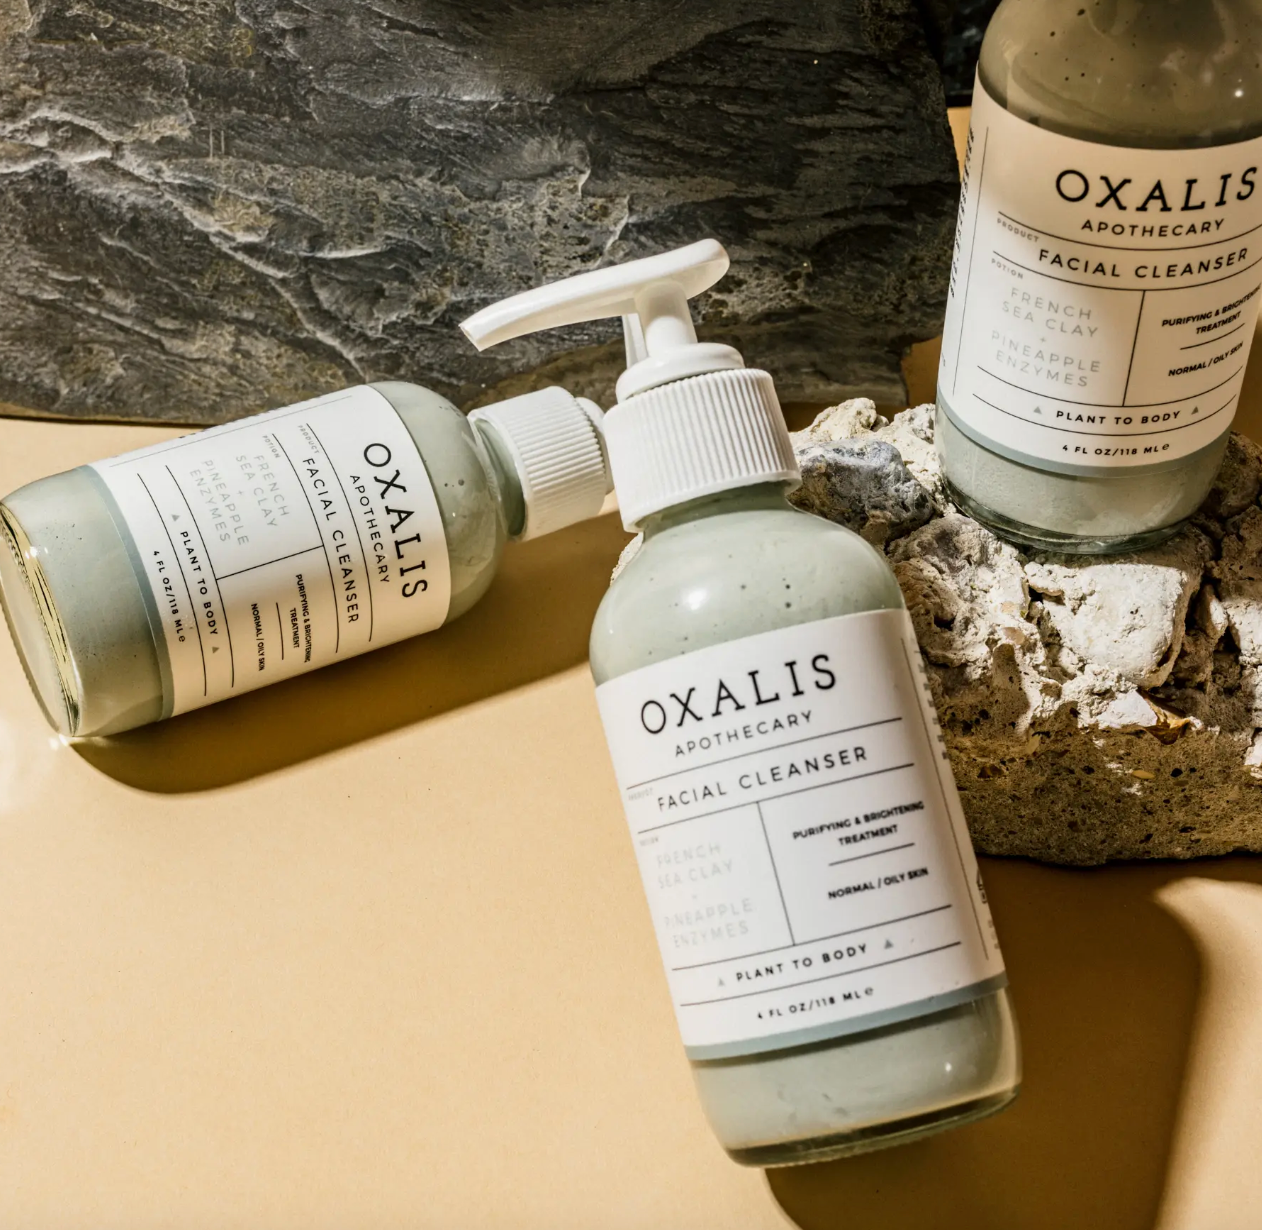 3 big bottles of Oxalis Apothecary - French Sea Clay + Pineapple Enymes Facial Cleanser